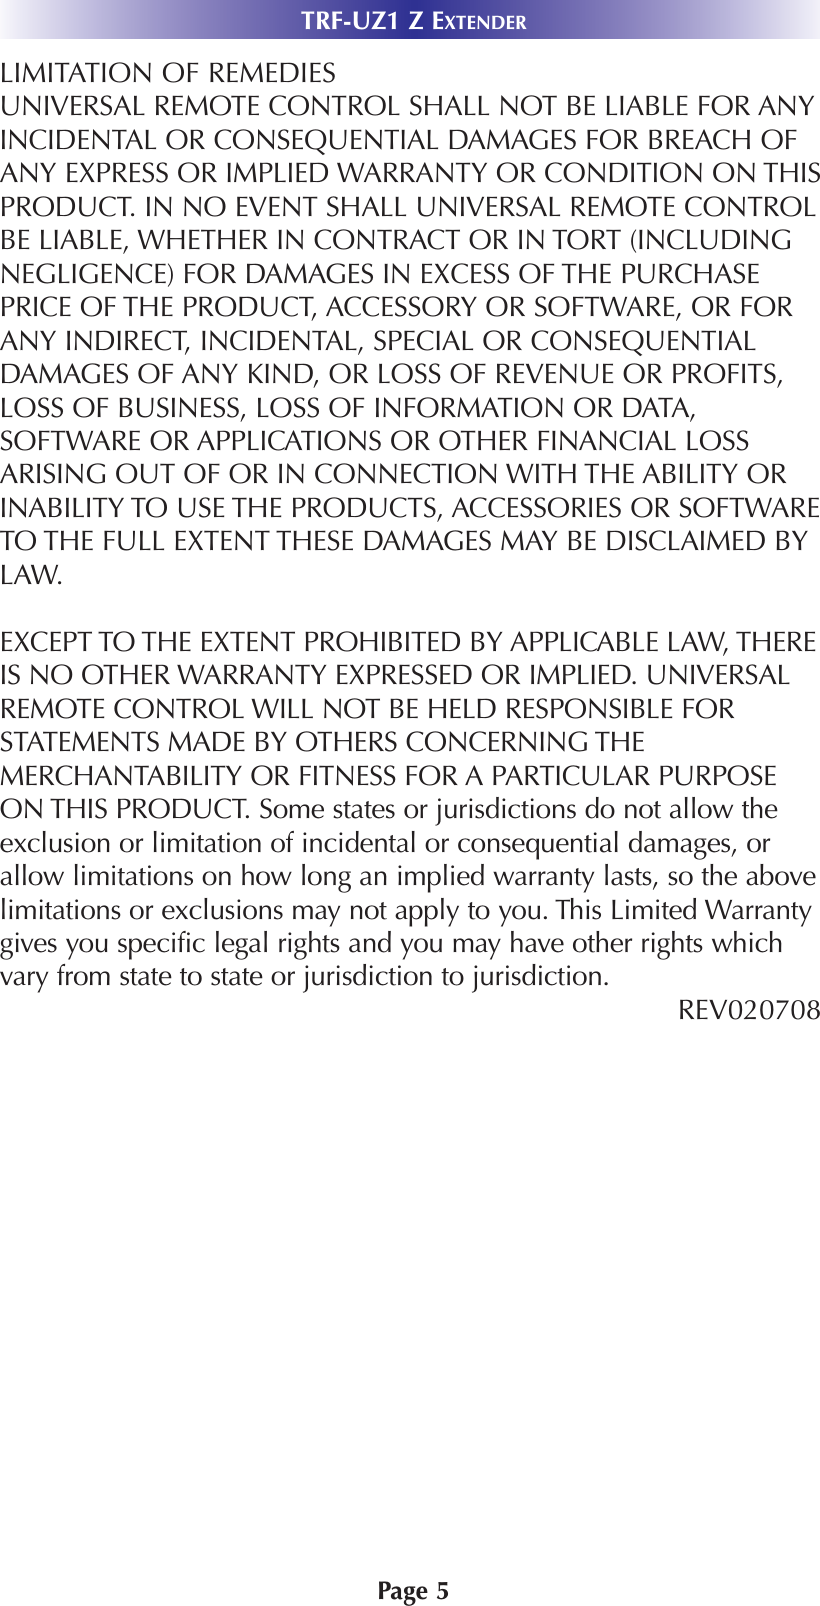 LIMITATION OF REMEDIESUNIVERSAL REMOTE CONTROL SHALL NOT BE LIABLE FOR ANYINCIDENTAL OR CONSEQUENTIAL DAMAGES FOR BREACH OFANY EXPRESS OR IMPLIED WARRANTY OR CONDITION ON THISPRODUCT. IN NO EVENT SHALL UNIVERSAL REMOTE CONTROLBE LIABLE, WHETHER IN CONTRACT OR IN TORT (INCLUDINGNEGLIGENCE) FOR DAMAGES IN EXCESS OF THE PURCHASEPRICE OF THE PRODUCT, ACCESSORY OR SOFTWARE, OR FORANY INDIRECT, INCIDENTAL, SPECIAL OR CONSEQUENTIALDAMAGES OF ANY KIND, OR LOSS OF REVENUE OR PROFITS,LOSS OF BUSINESS, LOSS OF INFORMATION OR DATA,SOFTWARE OR APPLICATIONS OR OTHER FINANCIAL LOSSARISING OUT OF OR IN CONNECTION WITH THE ABILITY ORINABILITY TO USE THE PRODUCTS, ACCESSORIES OR SOFTWARETO THE FULL EXTENT THESE DAMAGES MAY BE DISCLAIMED BYLAW. EXCEPT TO THE EXTENT PROHIBITED BY APPLICABLE LAW, THEREIS NO OTHER WARRANTY EXPRESSED OR IMPLIED. UNIVERSALREMOTE CONTROL WILL NOT BE HELD RESPONSIBLE FORSTATEMENTS MADE BY OTHERS CONCERNING THEMERCHANTABILITY OR FITNESS FOR A PARTICULAR PURPOSEON THIS PRODUCT. Some states or jurisdictions do not allow theexclusion or limitation of incidental or consequential damages, orallow limitations on how long an implied warranty lasts, so the abovelimitations or exclusions may not apply to you. This Limited Warrantygives you specific legal rights and you may have other rights whichvary from state to state or jurisdiction to jurisdiction.REV020708 TRF-UZ1 Z EXTENDERPage 5